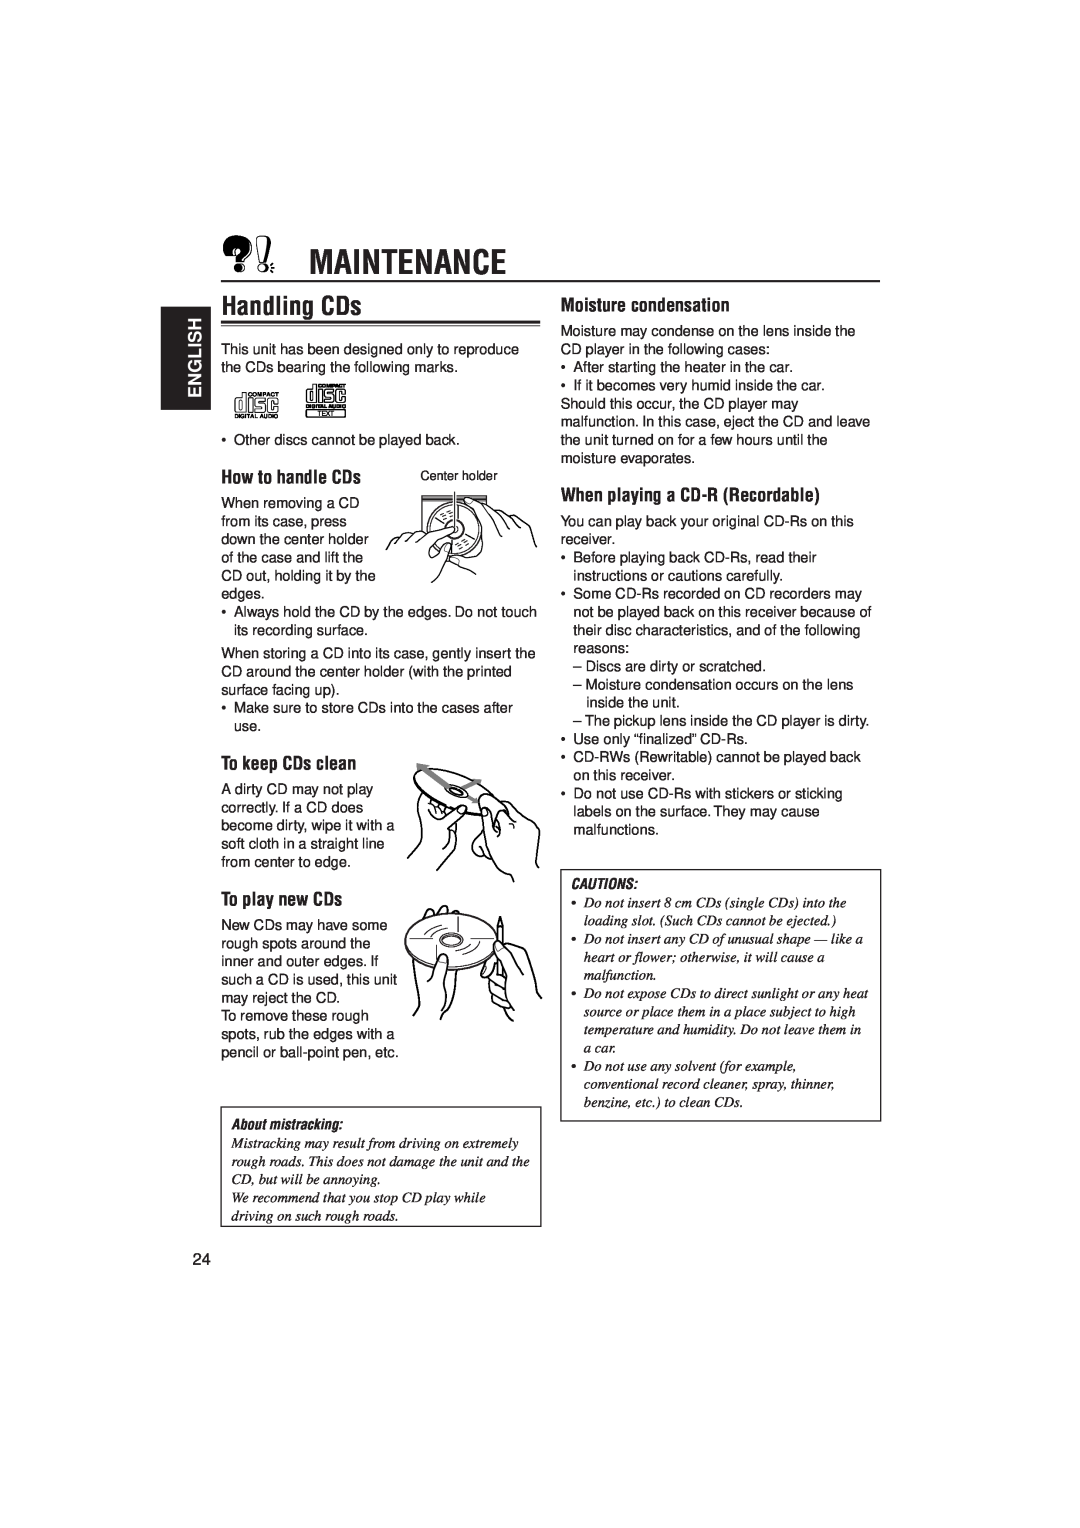 JVC KD-S9R manual Maintenance, Handling CDs, How to handle CDs, To keep CDs clean, To play new CDs, Moisture condensation 